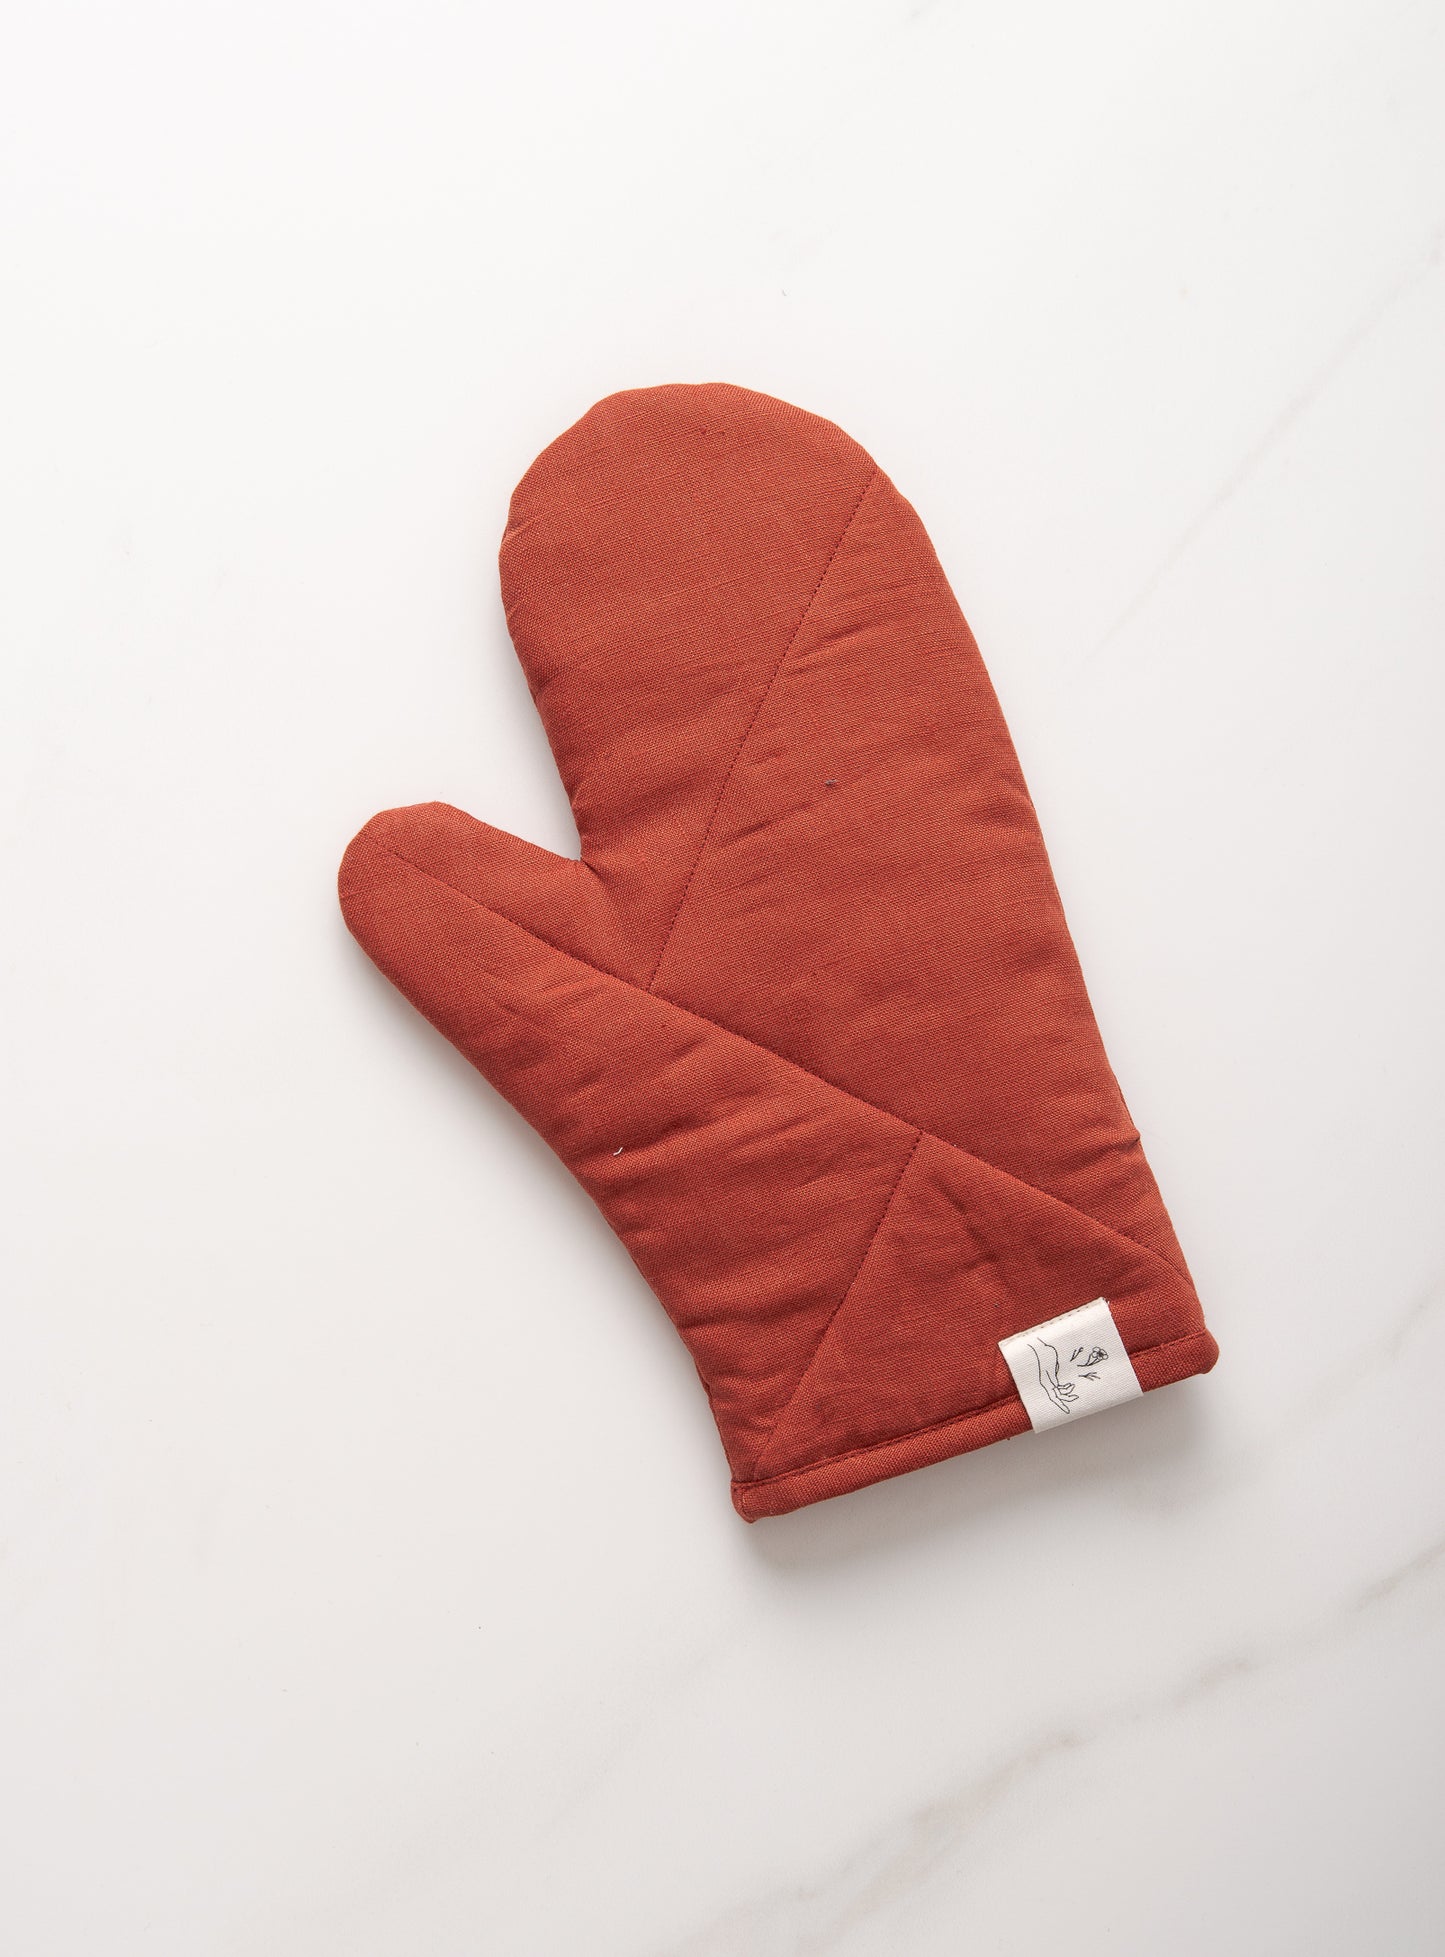 Oven Mitt (different colors available)